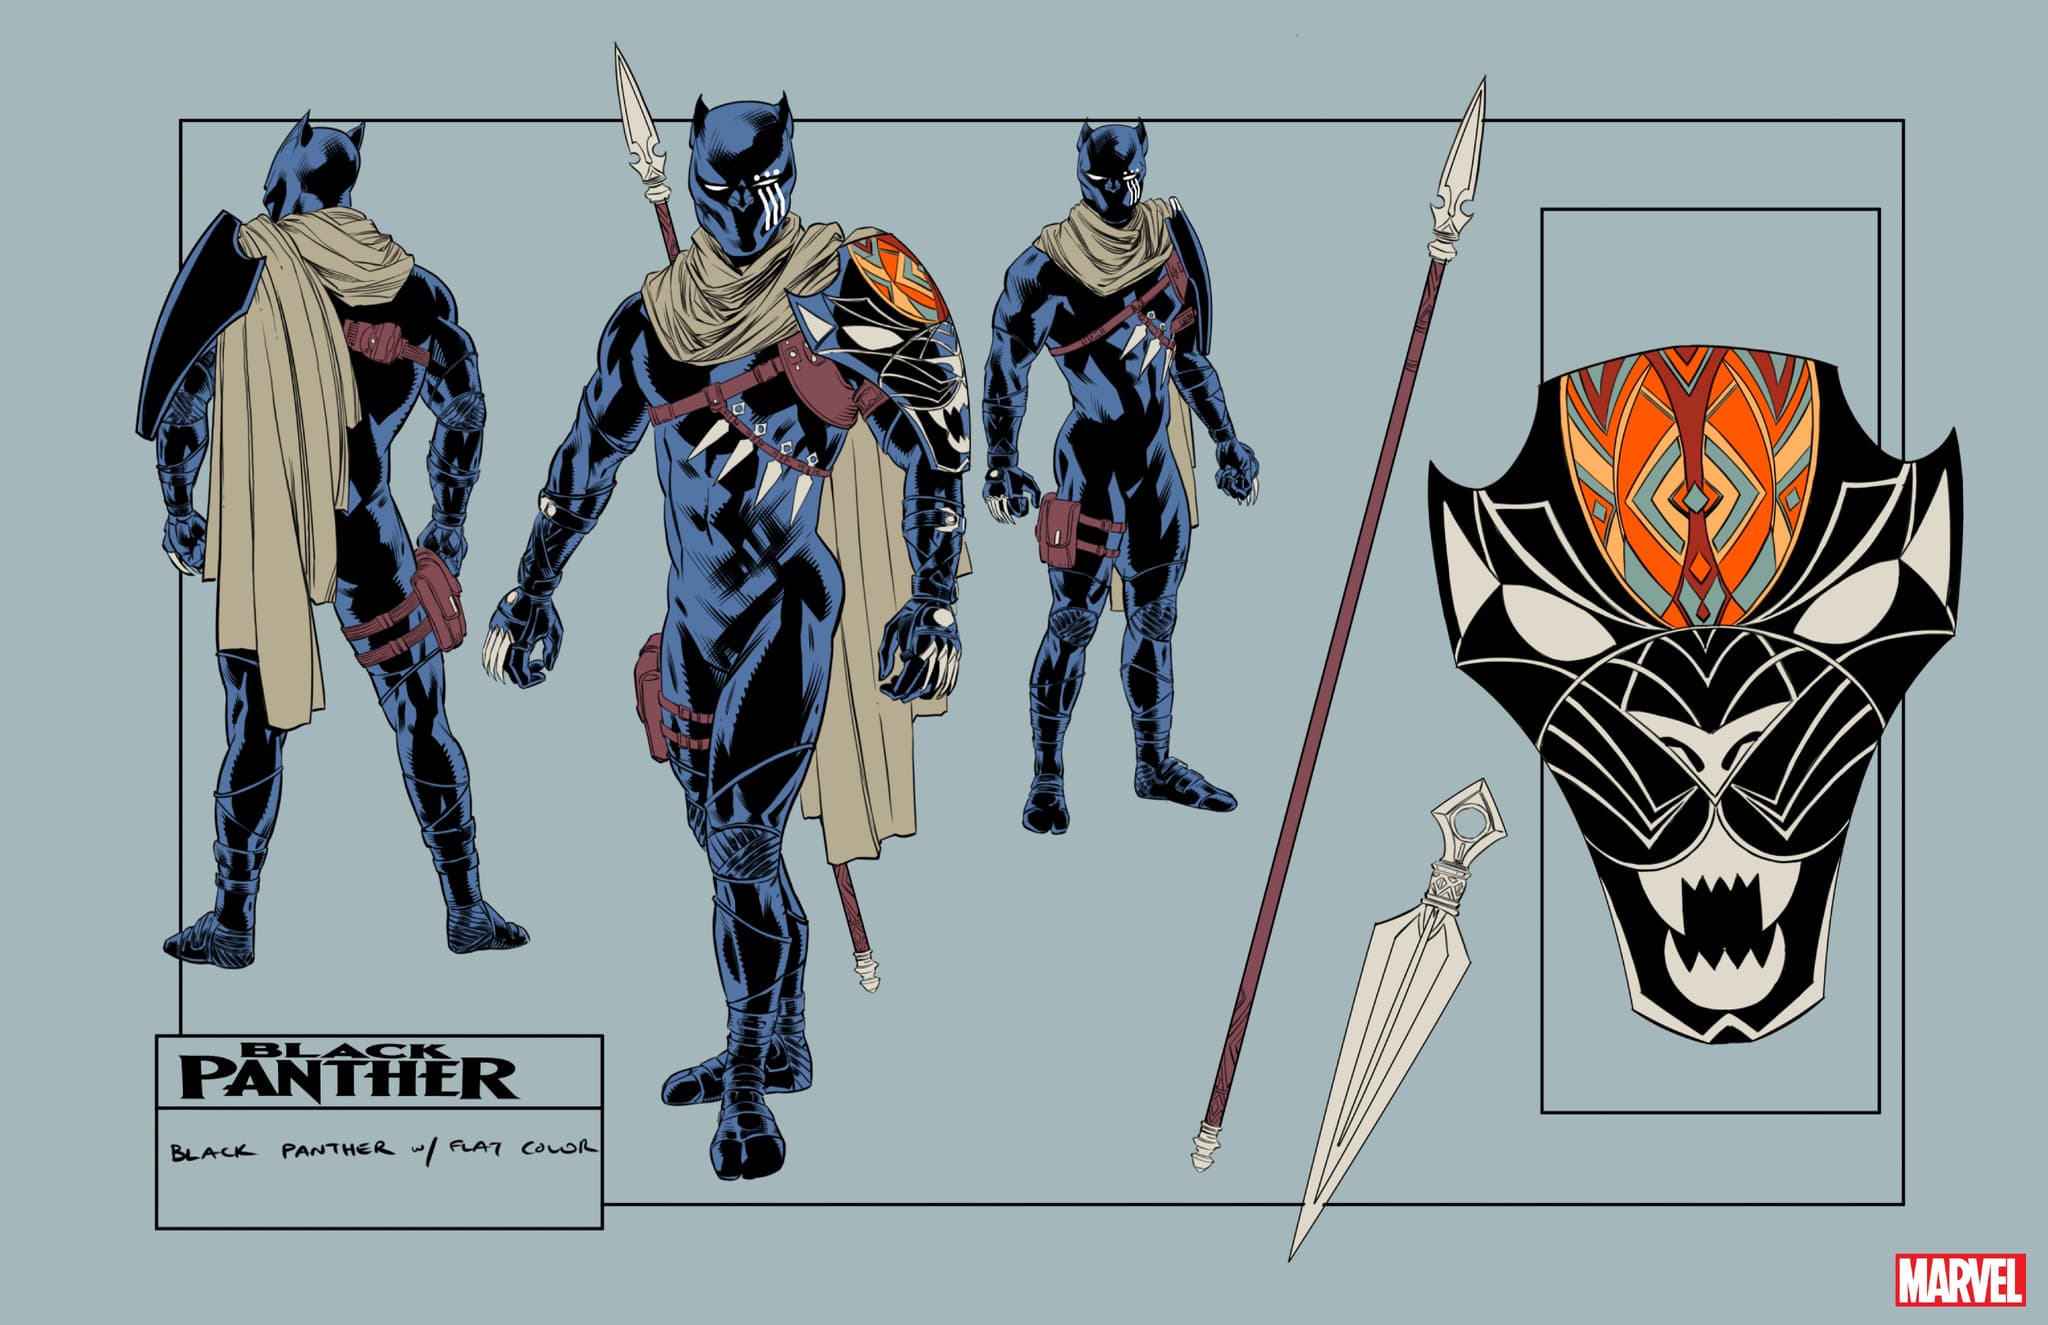 BLACK PANTHER character design sheet by Chris Allen